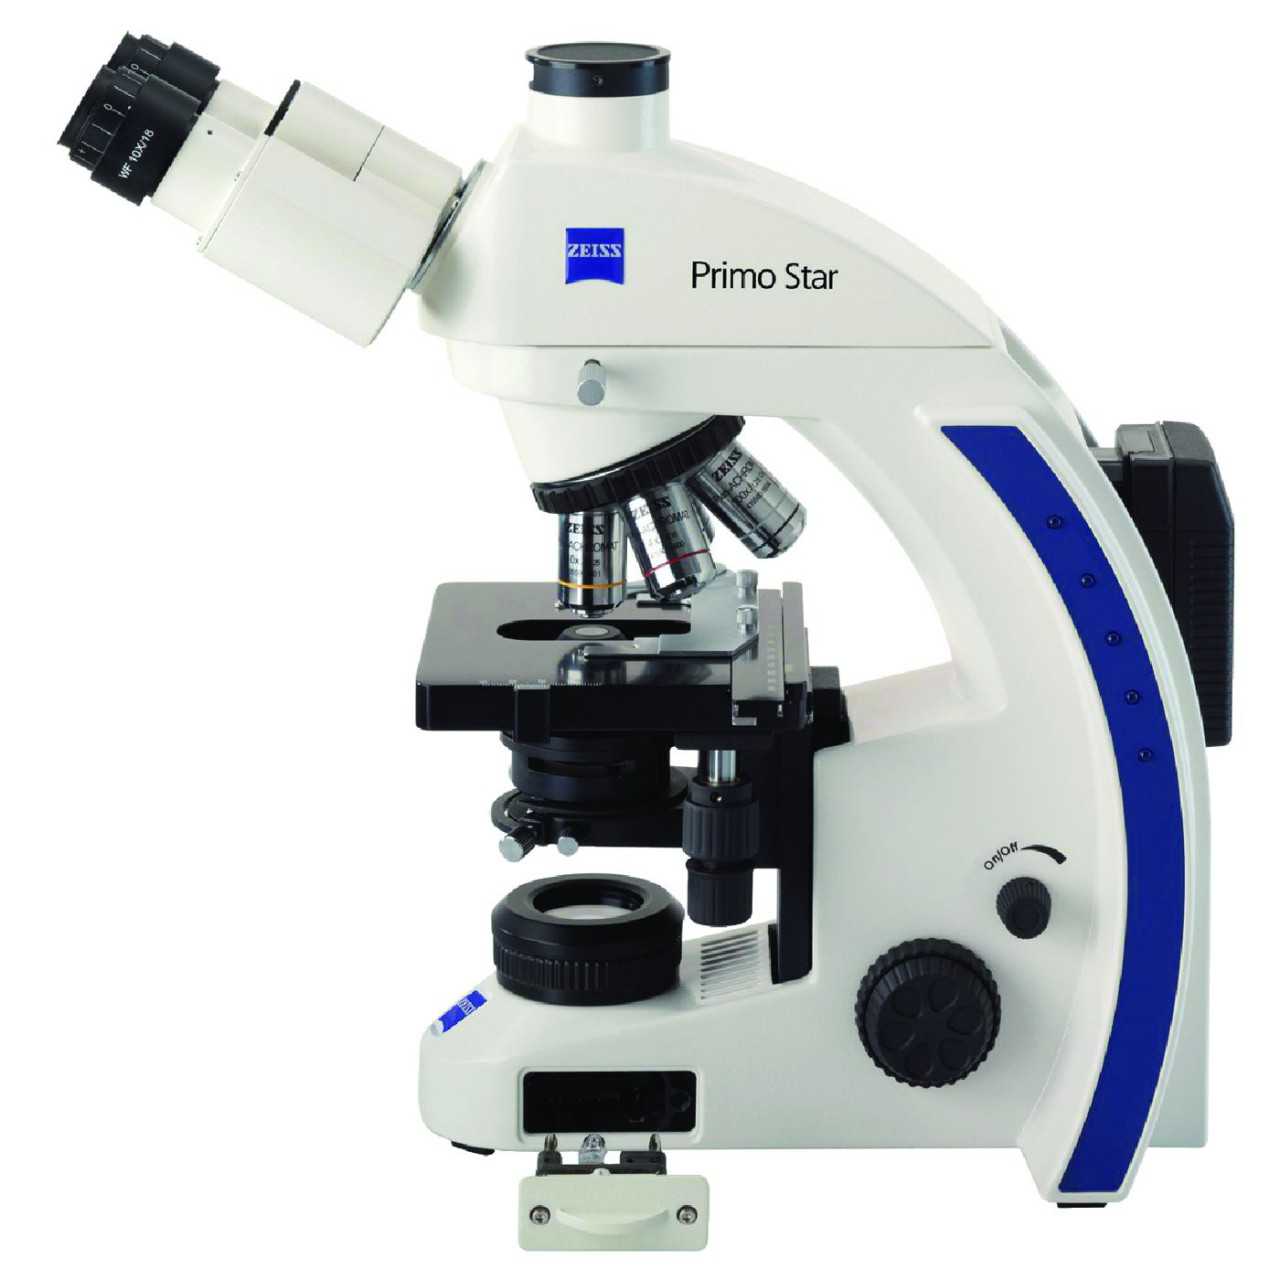 Complex of optical microscopes